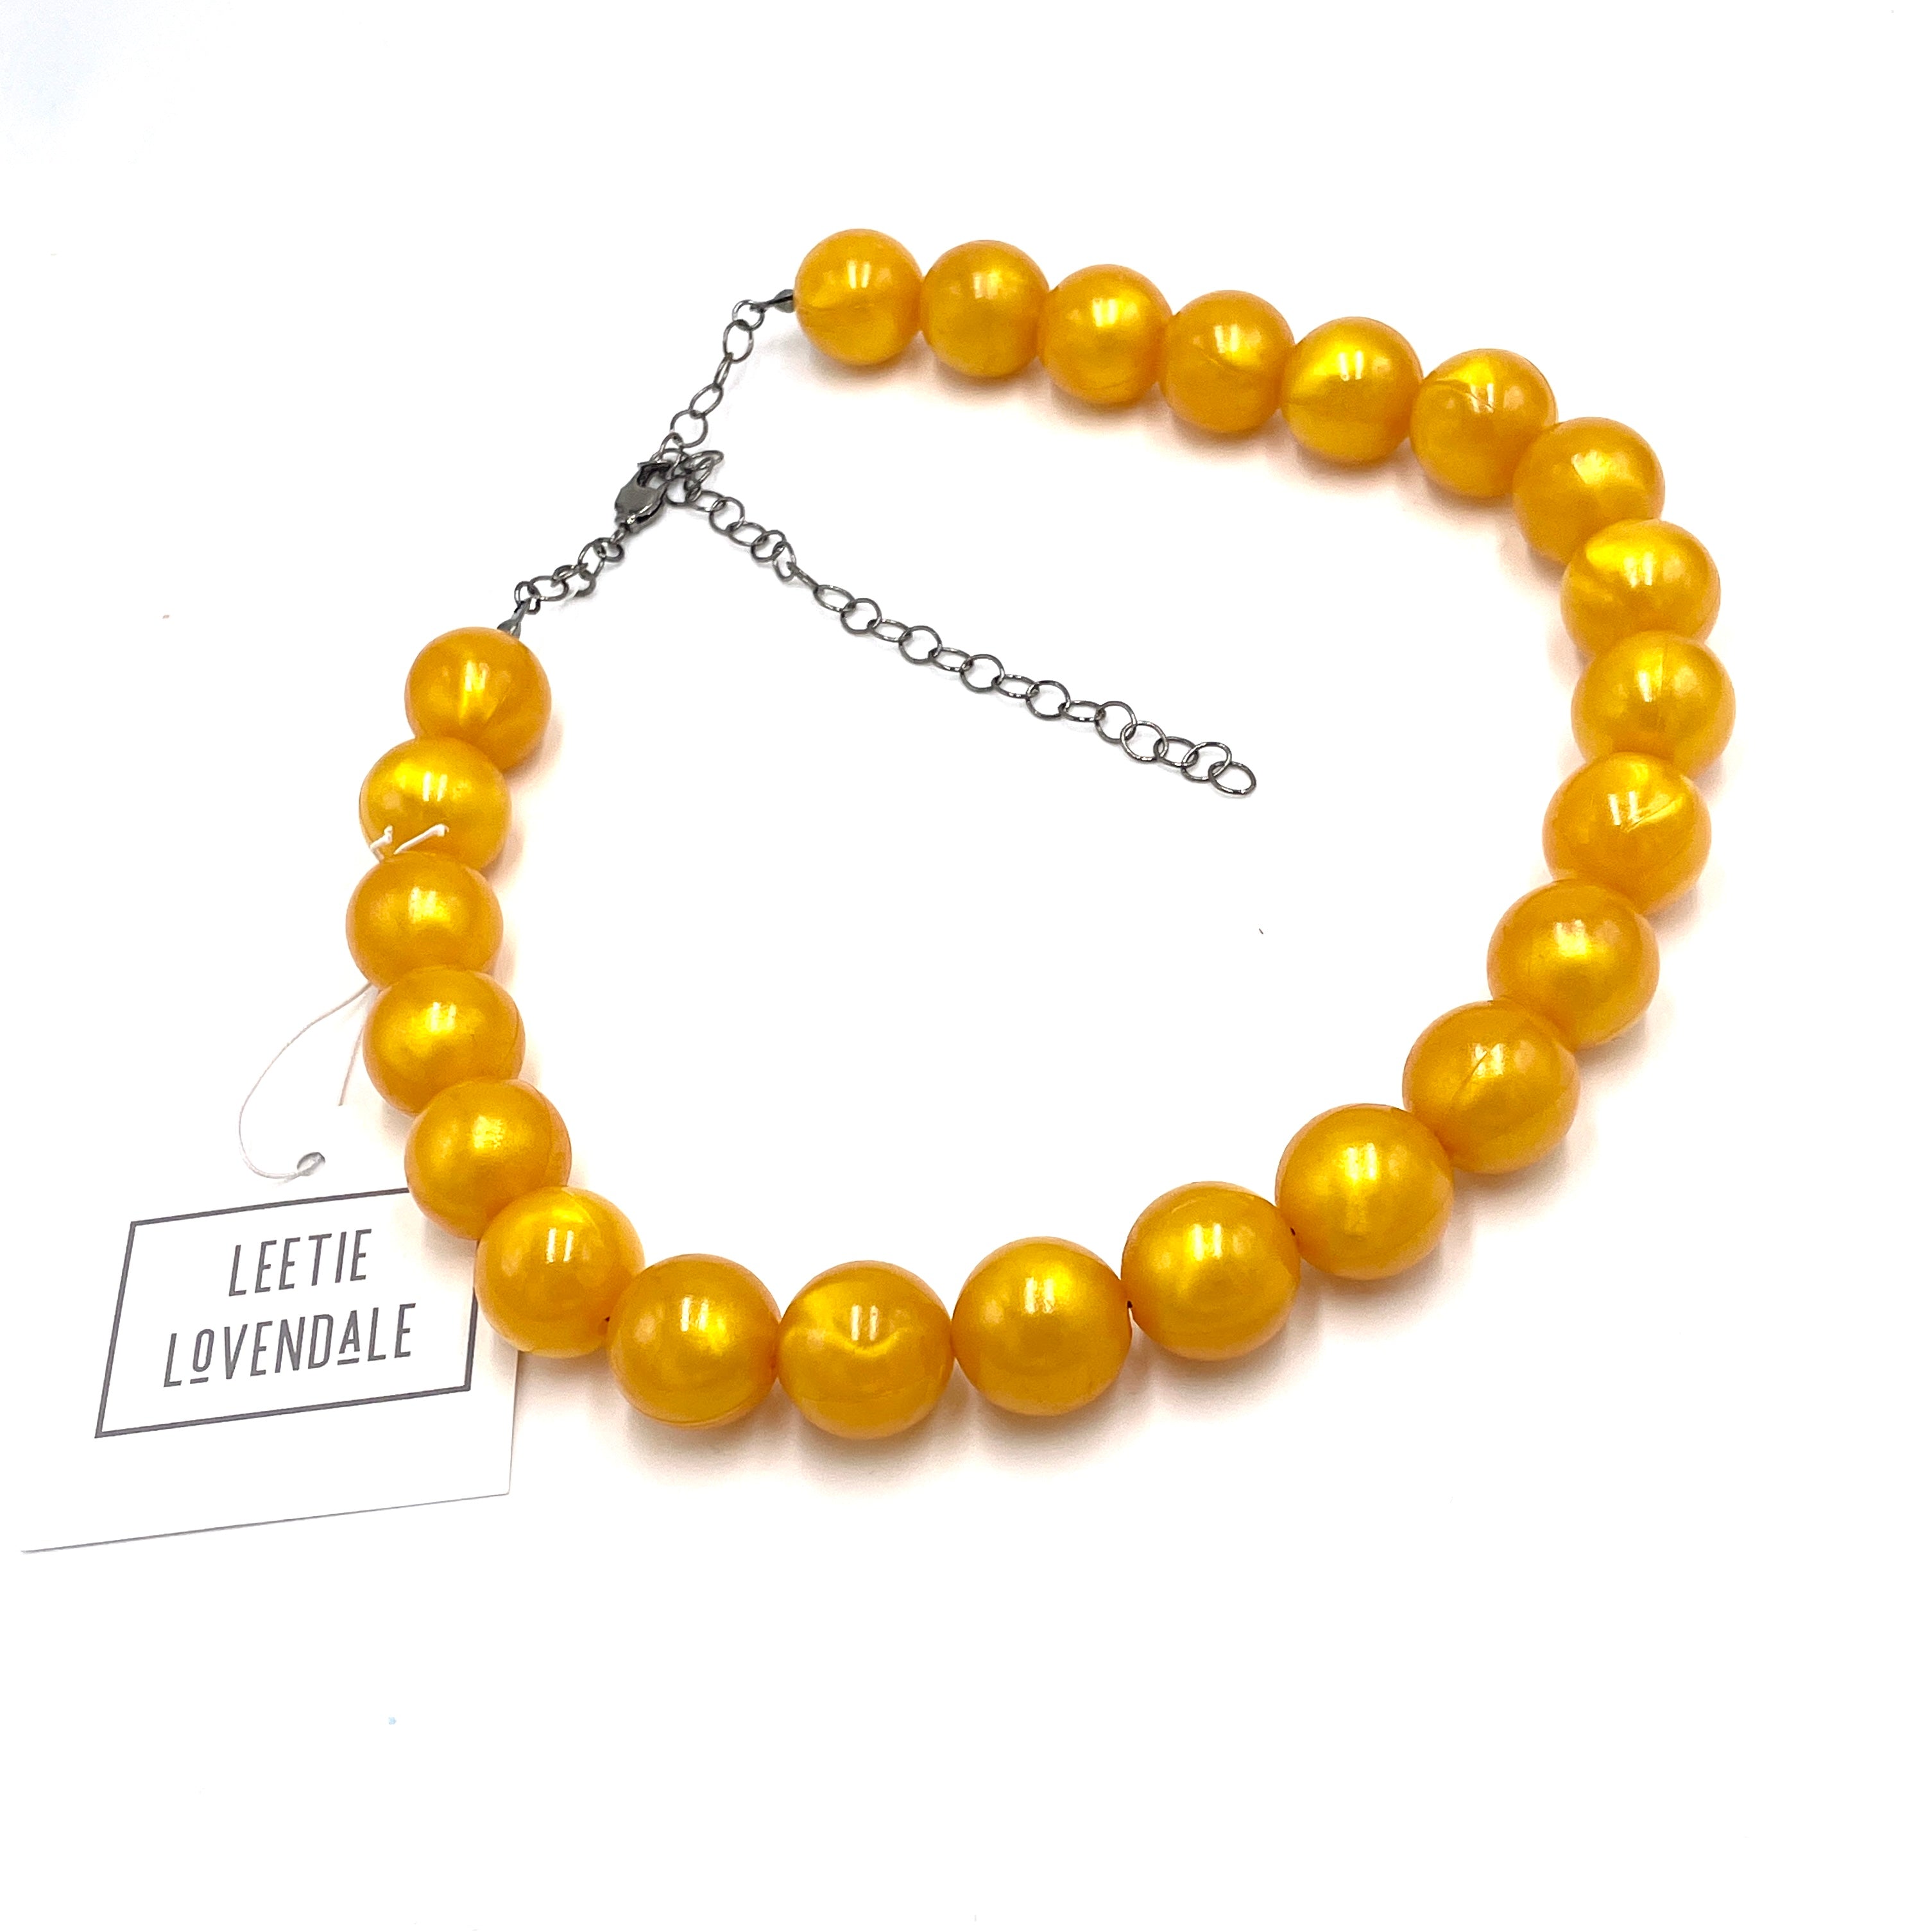 Vintage yellow lucite